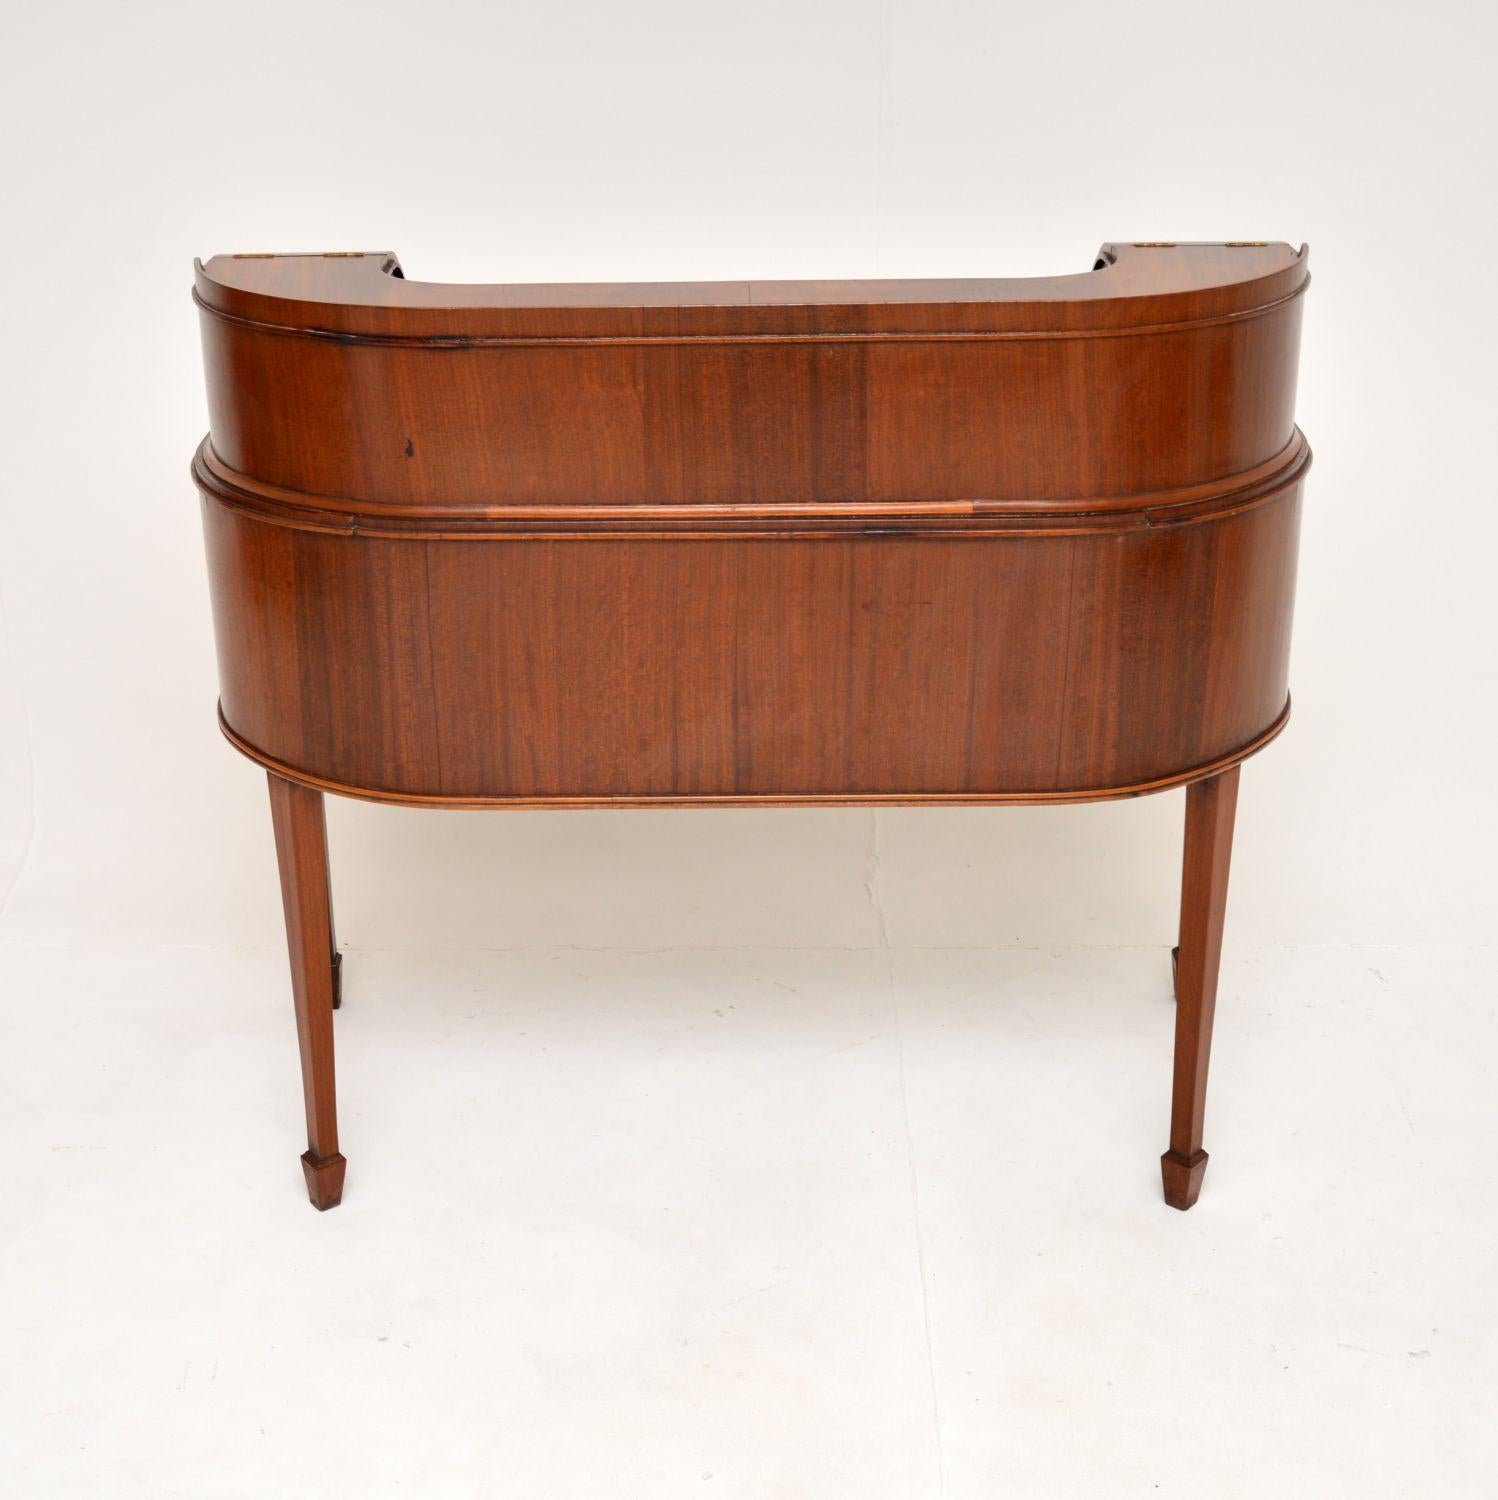 Early 20th Century Antique Leather Top Carlton House Desk